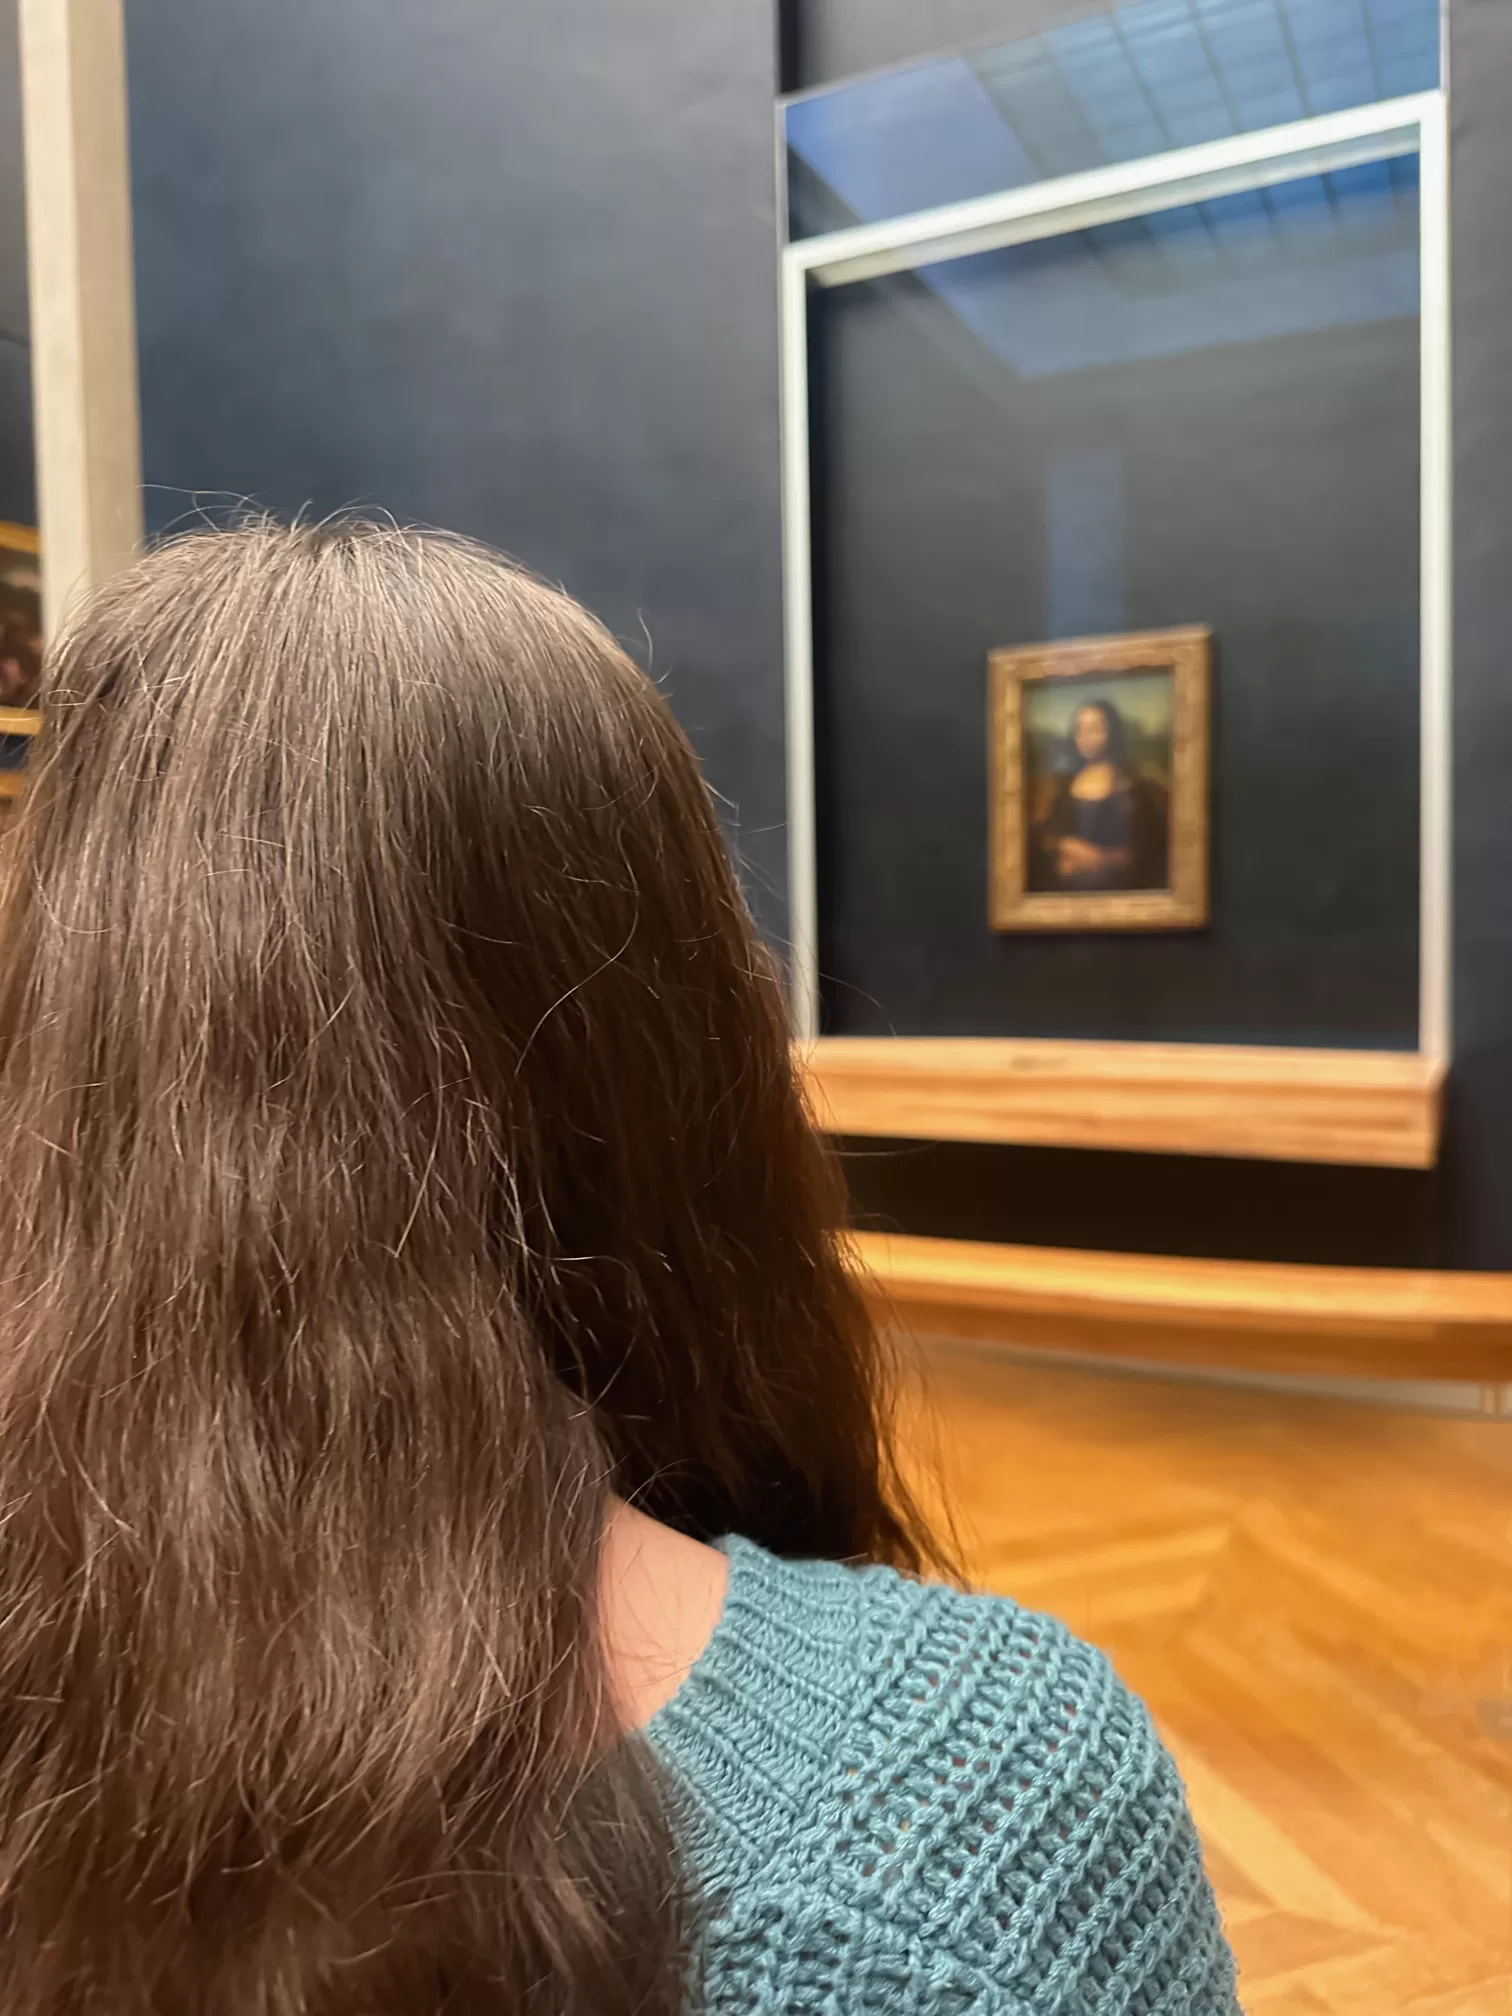 a girl viewing the mona lisa at theLouvre